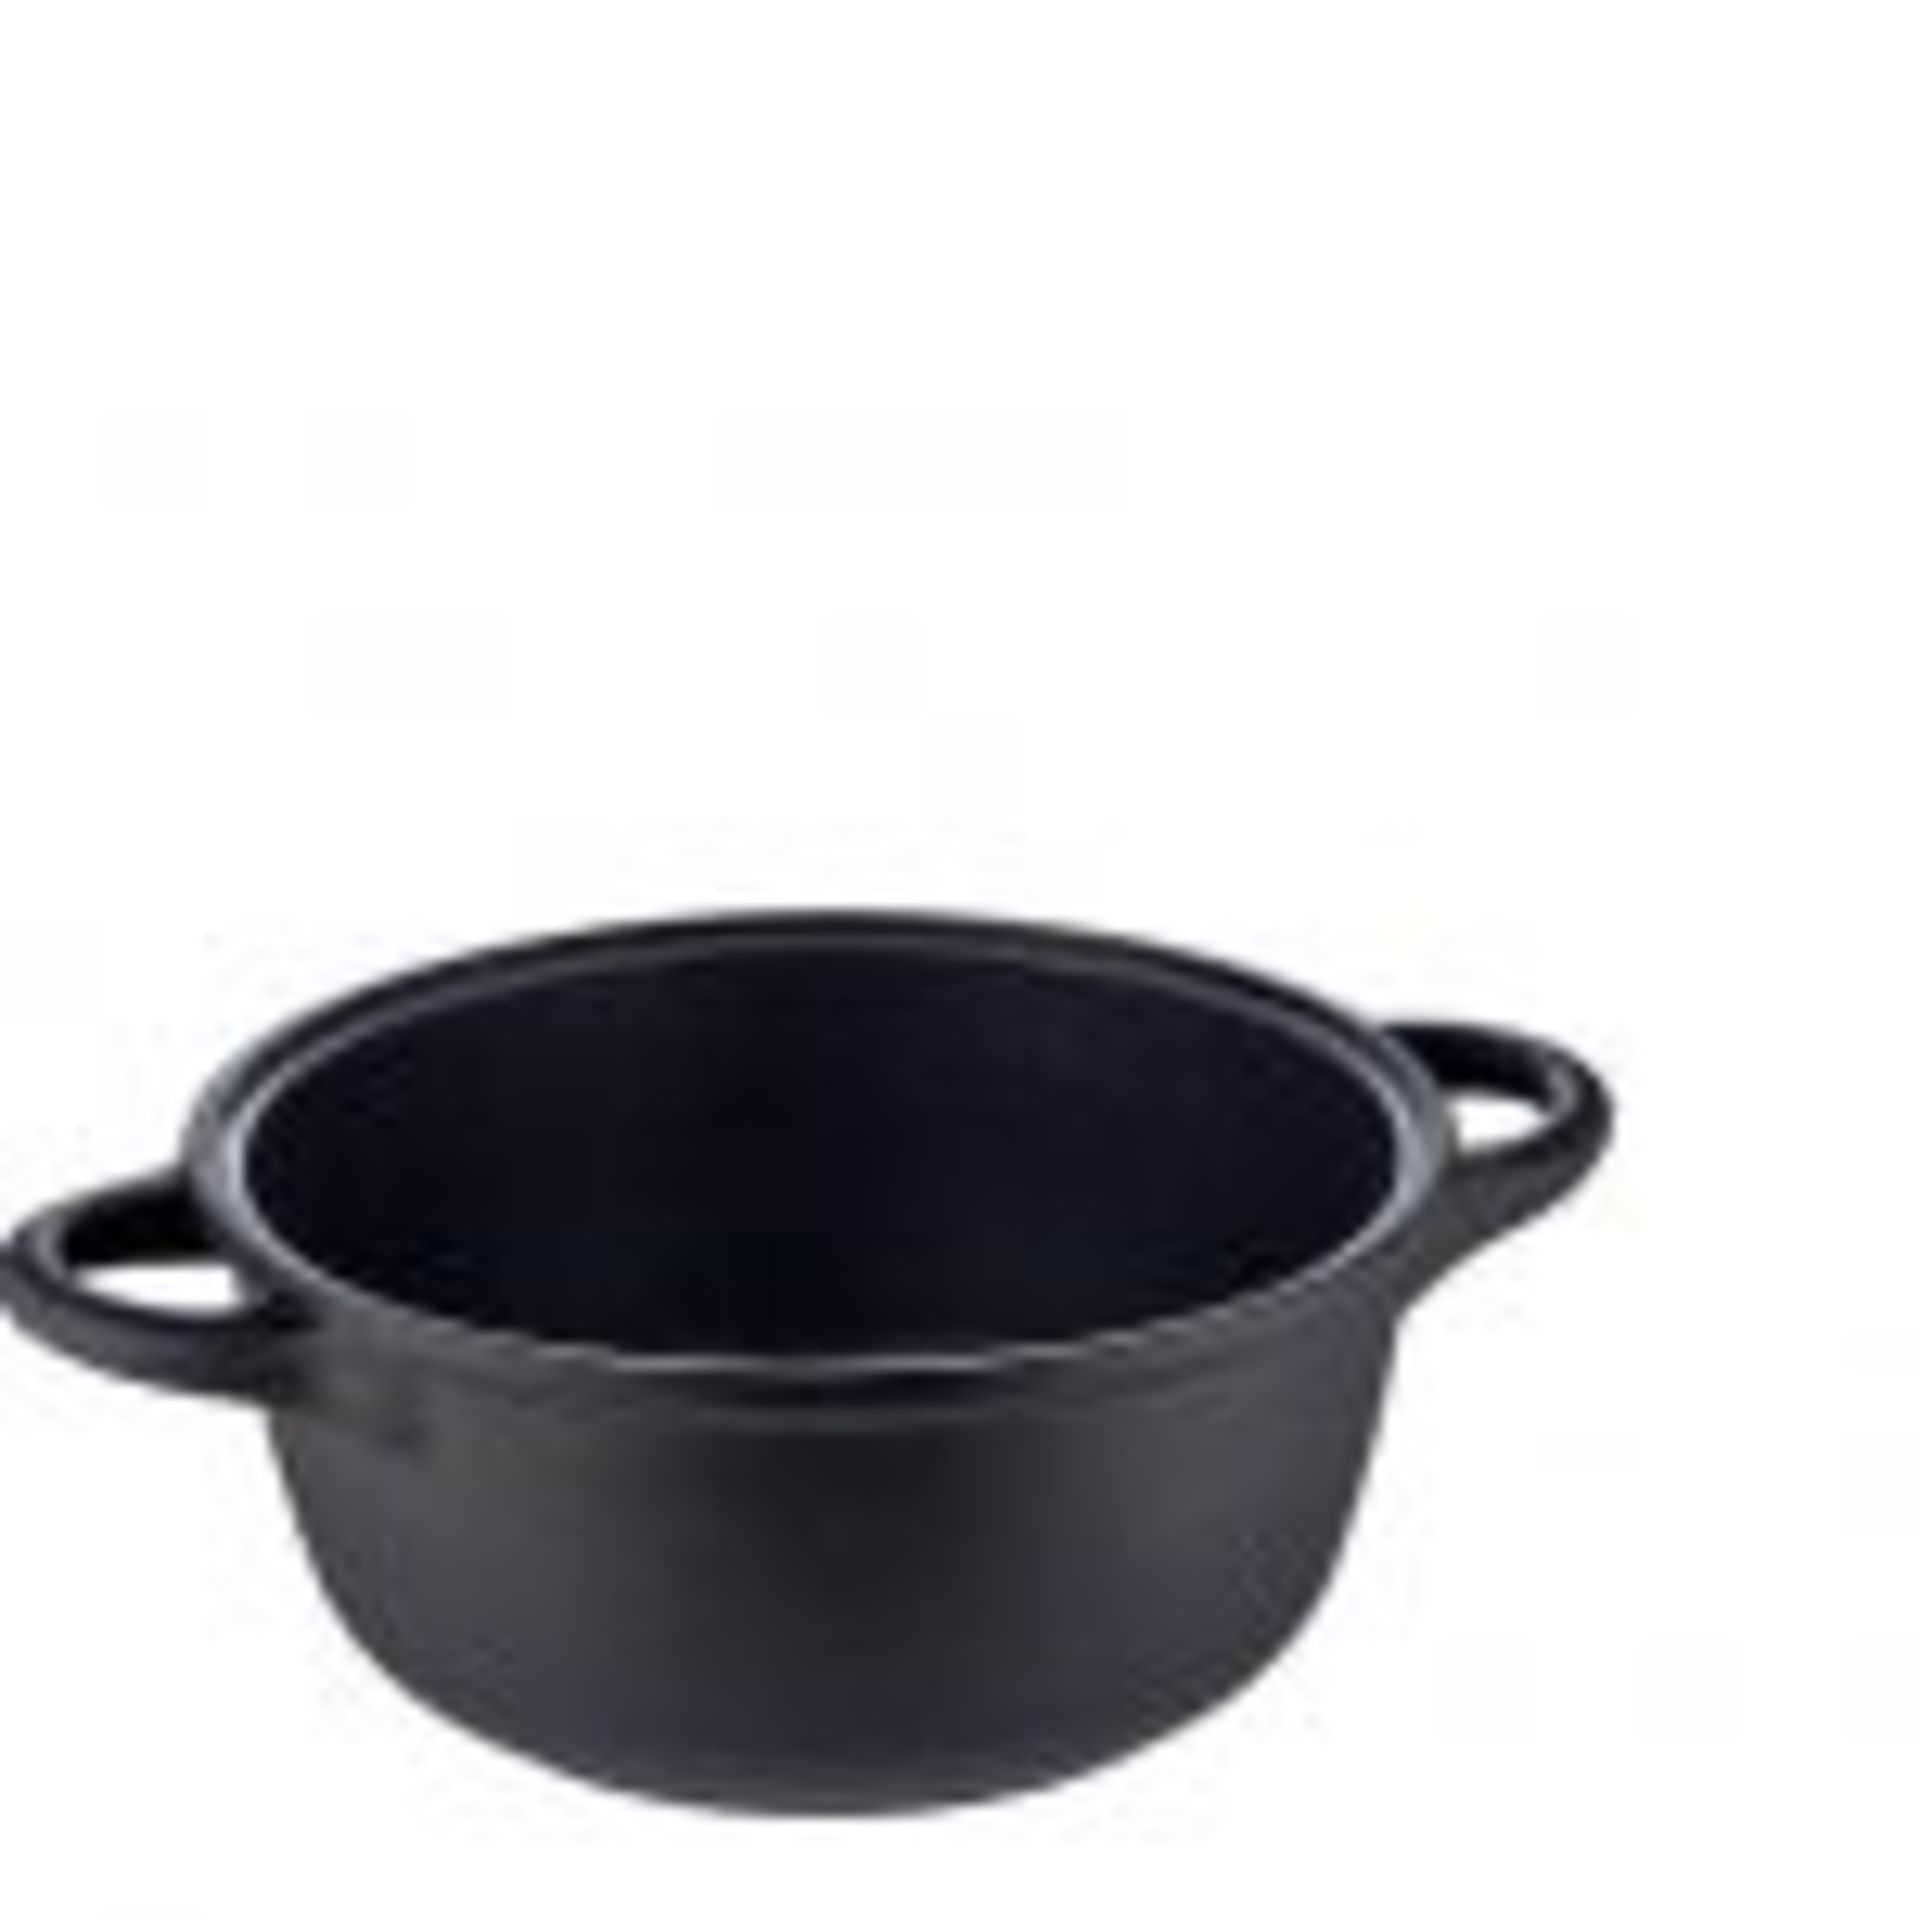 Crafond 24cm Stockpot twin handle with lid- non stick.